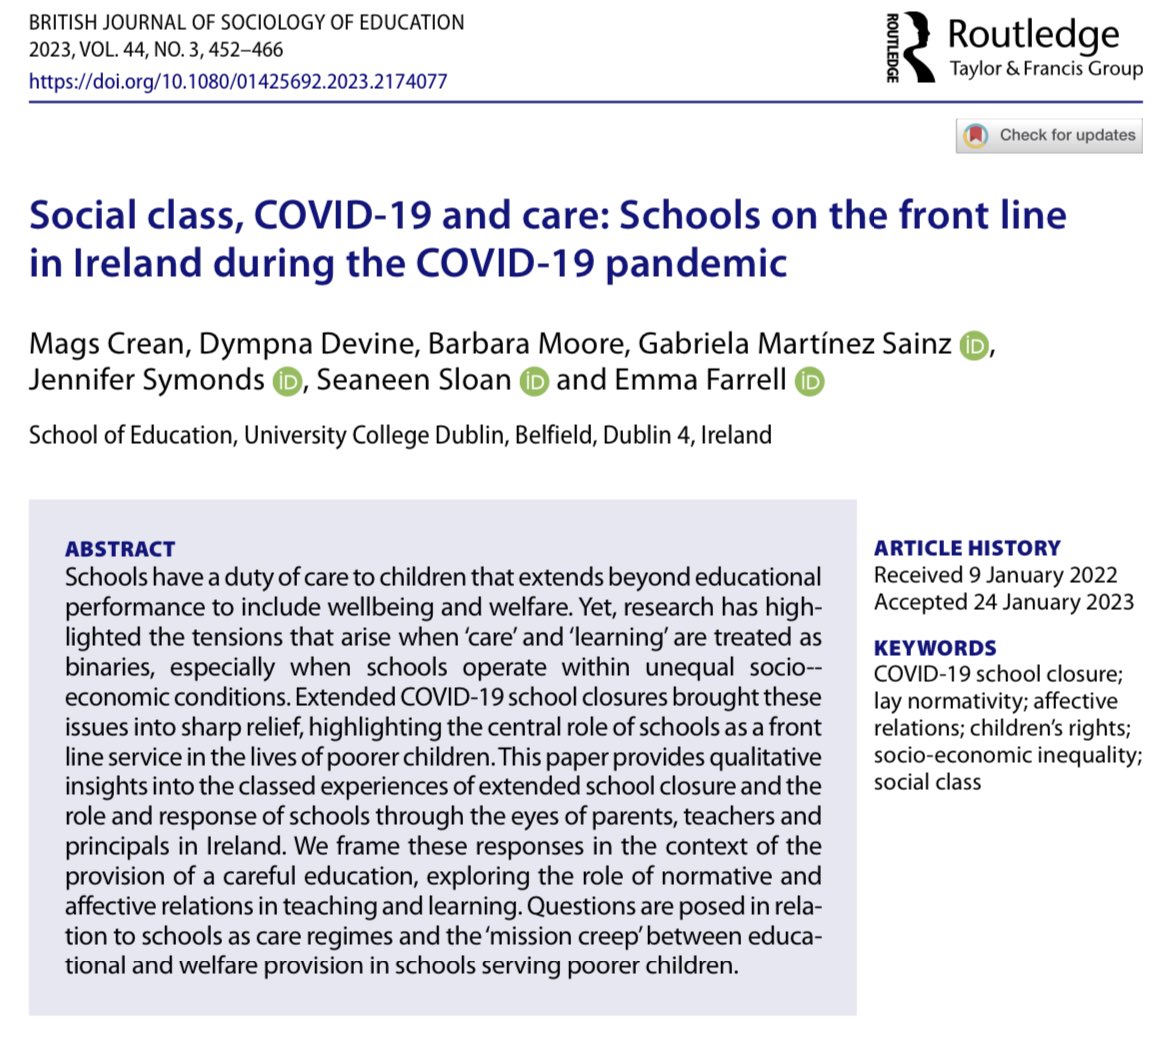 📄 #CSLstudy research in British Journal of Sociology of Education @BJSocEd 🚨 @DrMagsCrean and colleagues explore care and social class across CSL case study schools during Covid-19 closures. @SchoolofEdUCD @NCCAie #edchatie